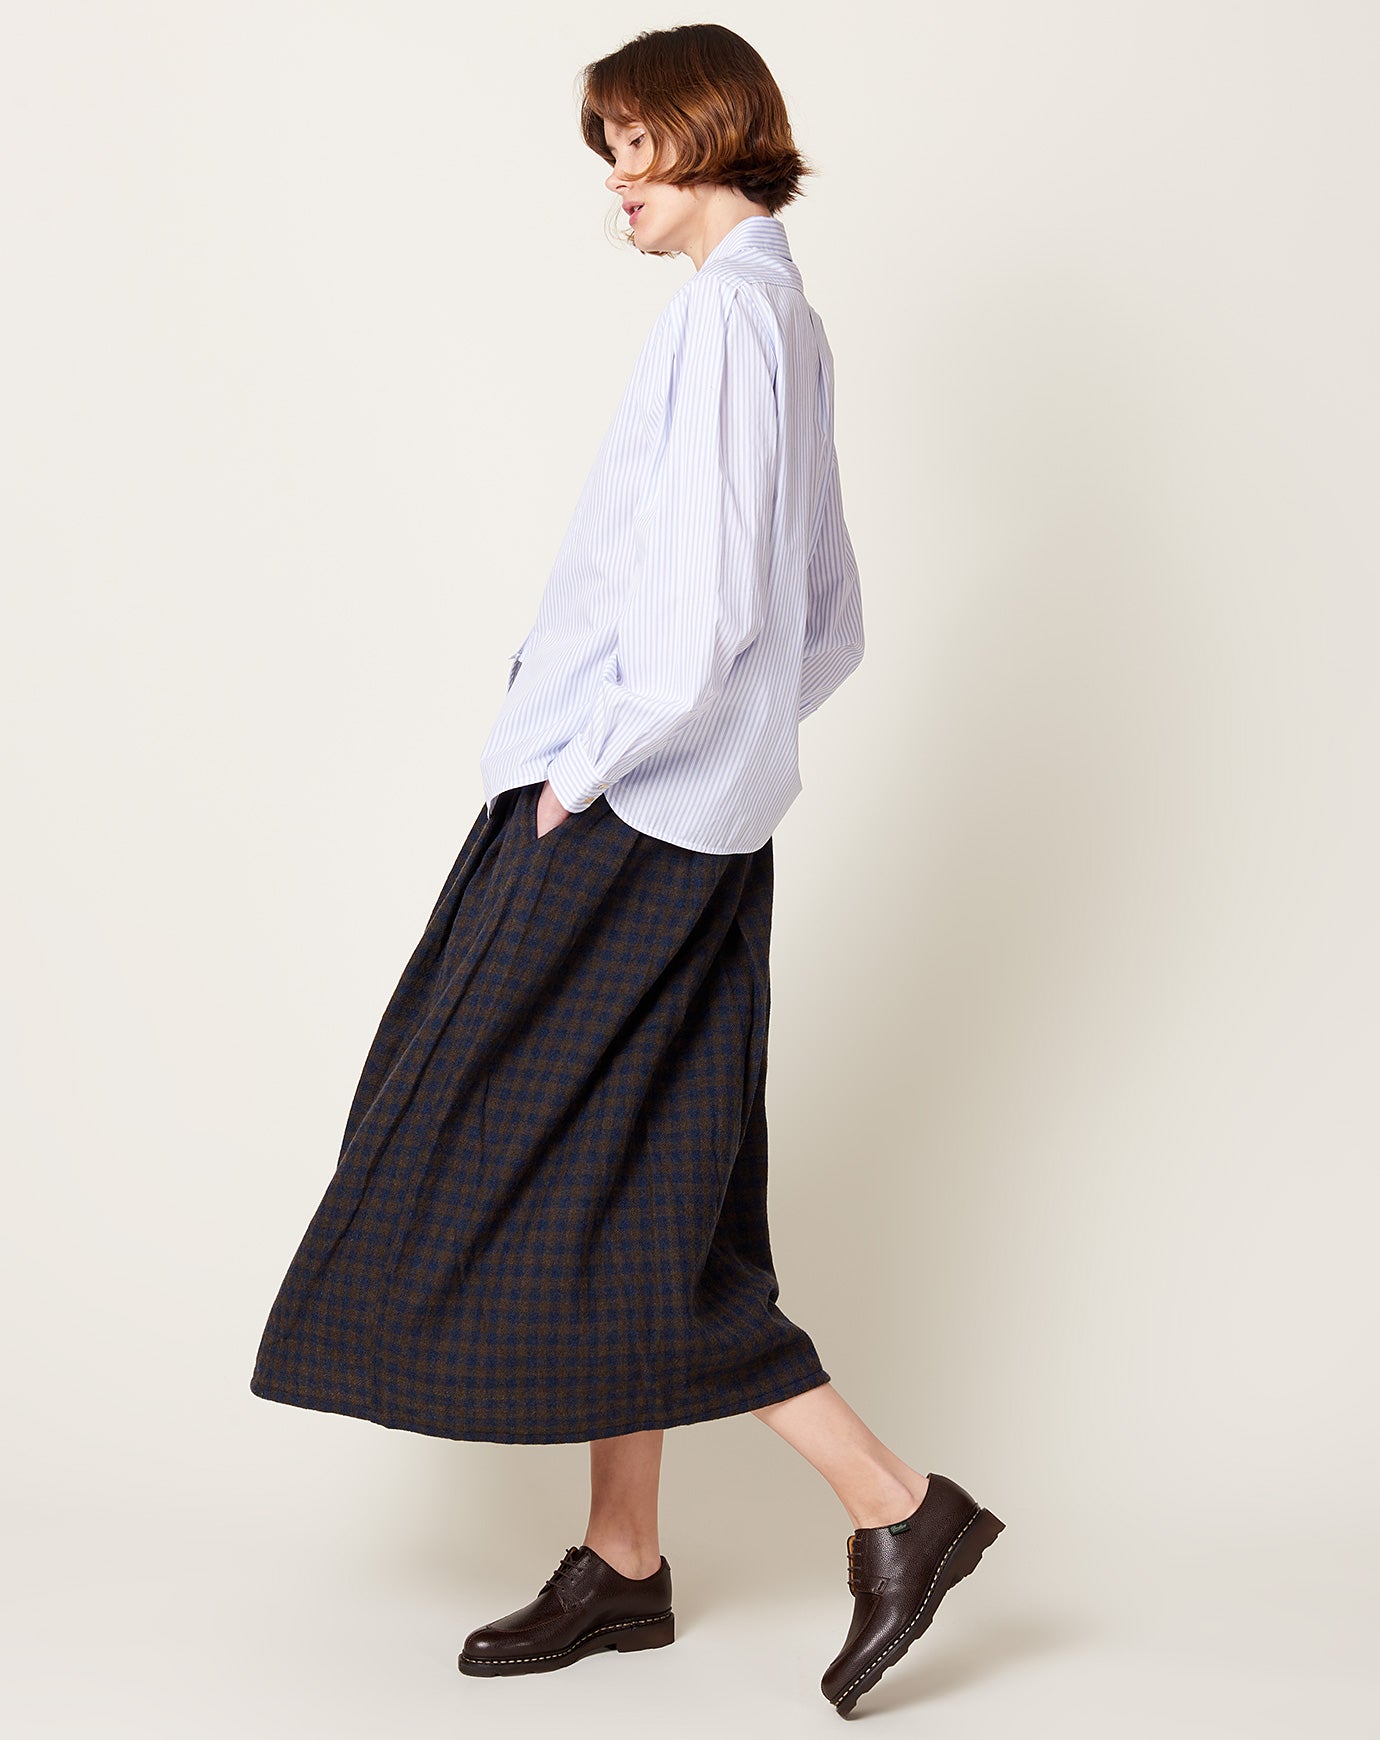 Ichi Wool Check Skirt in Navy and Brown